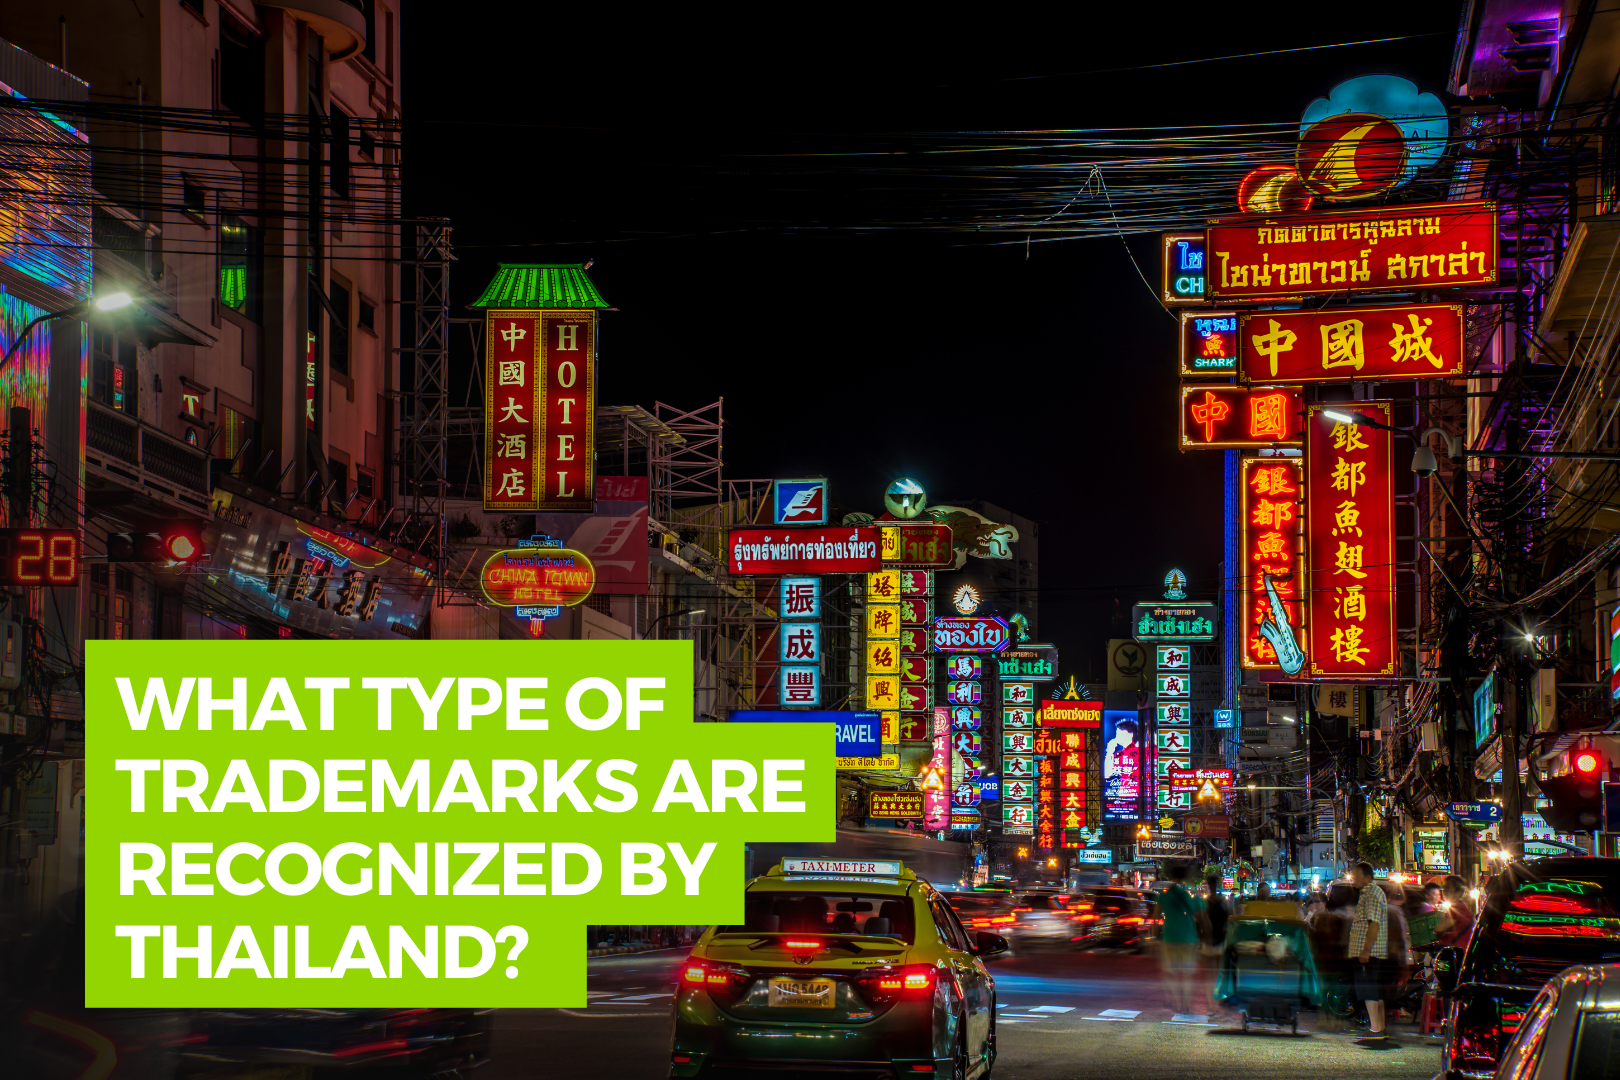 What Type of Trademarks are Recognized by Thailand